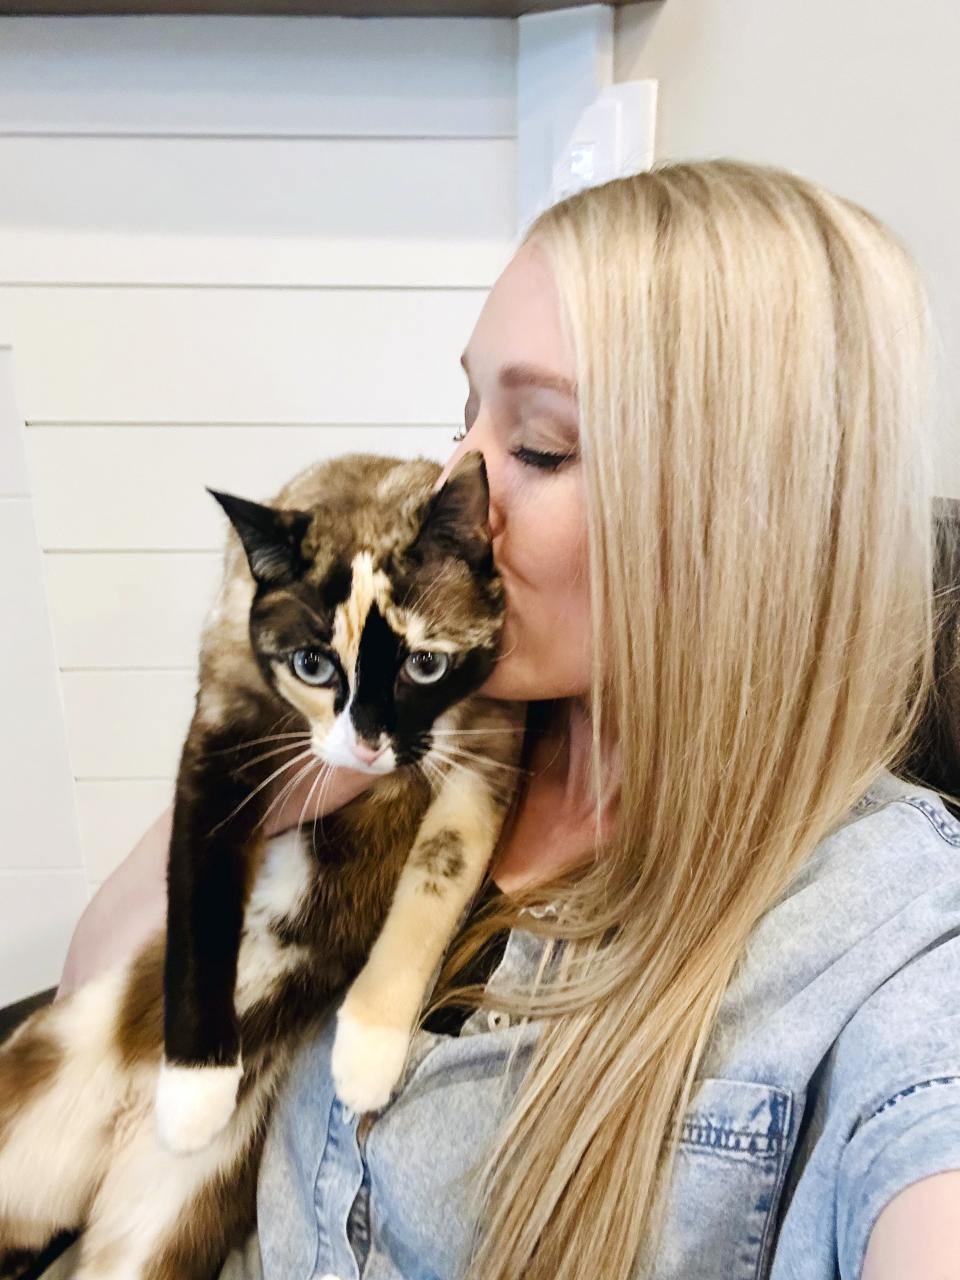 In this photo provided by Carrie Clark of Lehi, Utah, Carrie poses with Galena, a 6-year-old house cat. Clark says Galena went missing after jumping into a box being returned to Amazon without its owners noticing. (Carrie Clark via AP Photo)